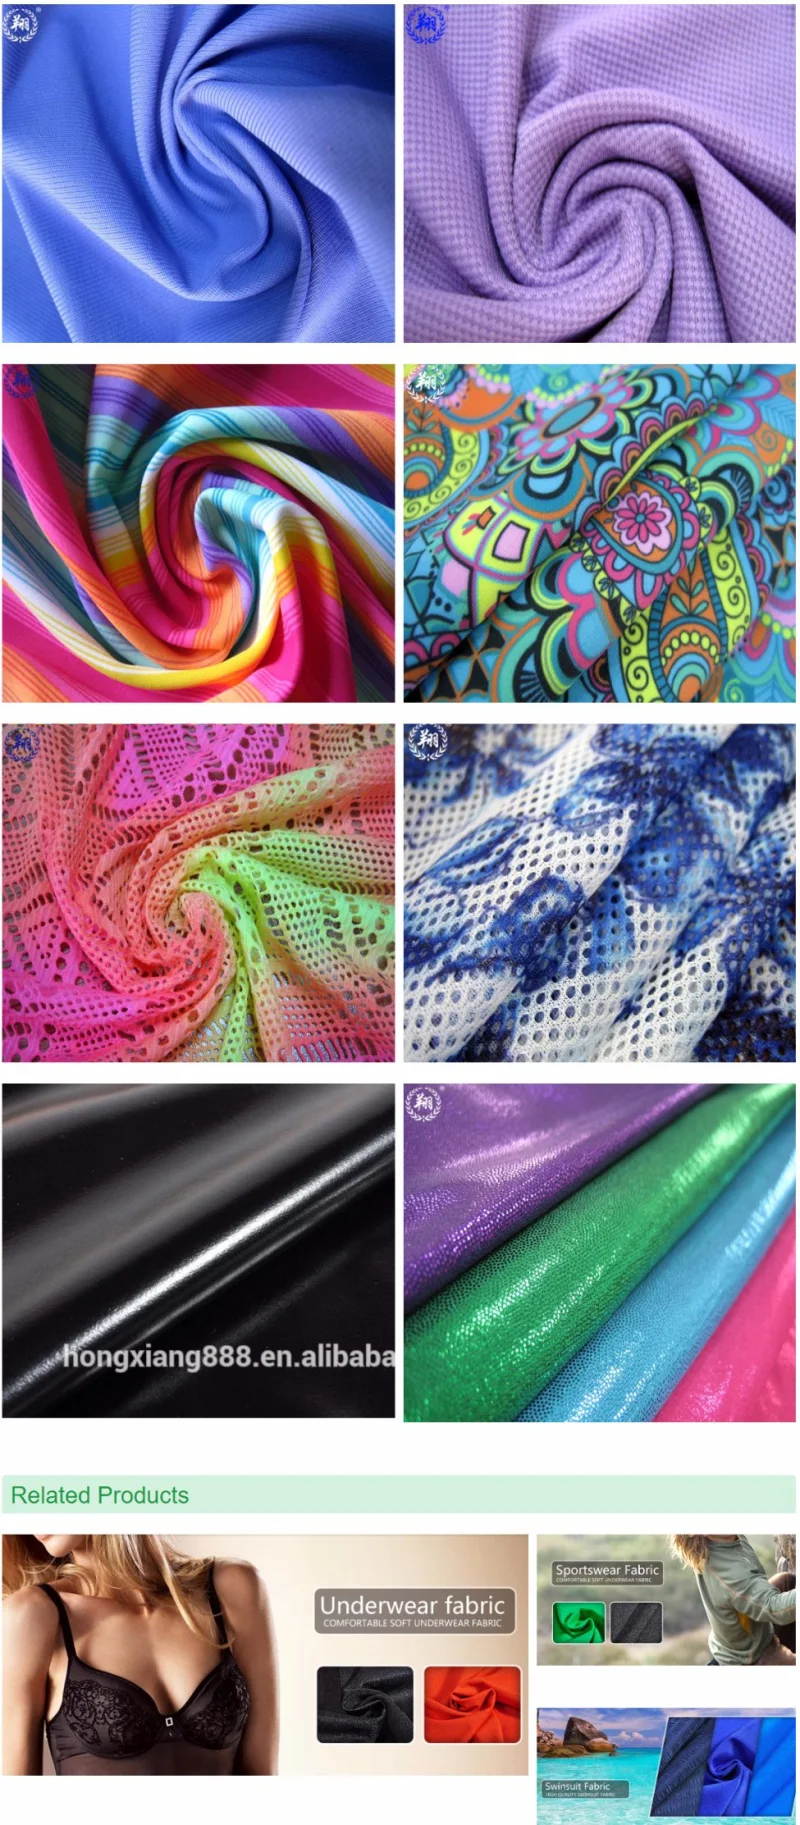 Hot Selling Prnting Garment Home Textile Knitted Fabric